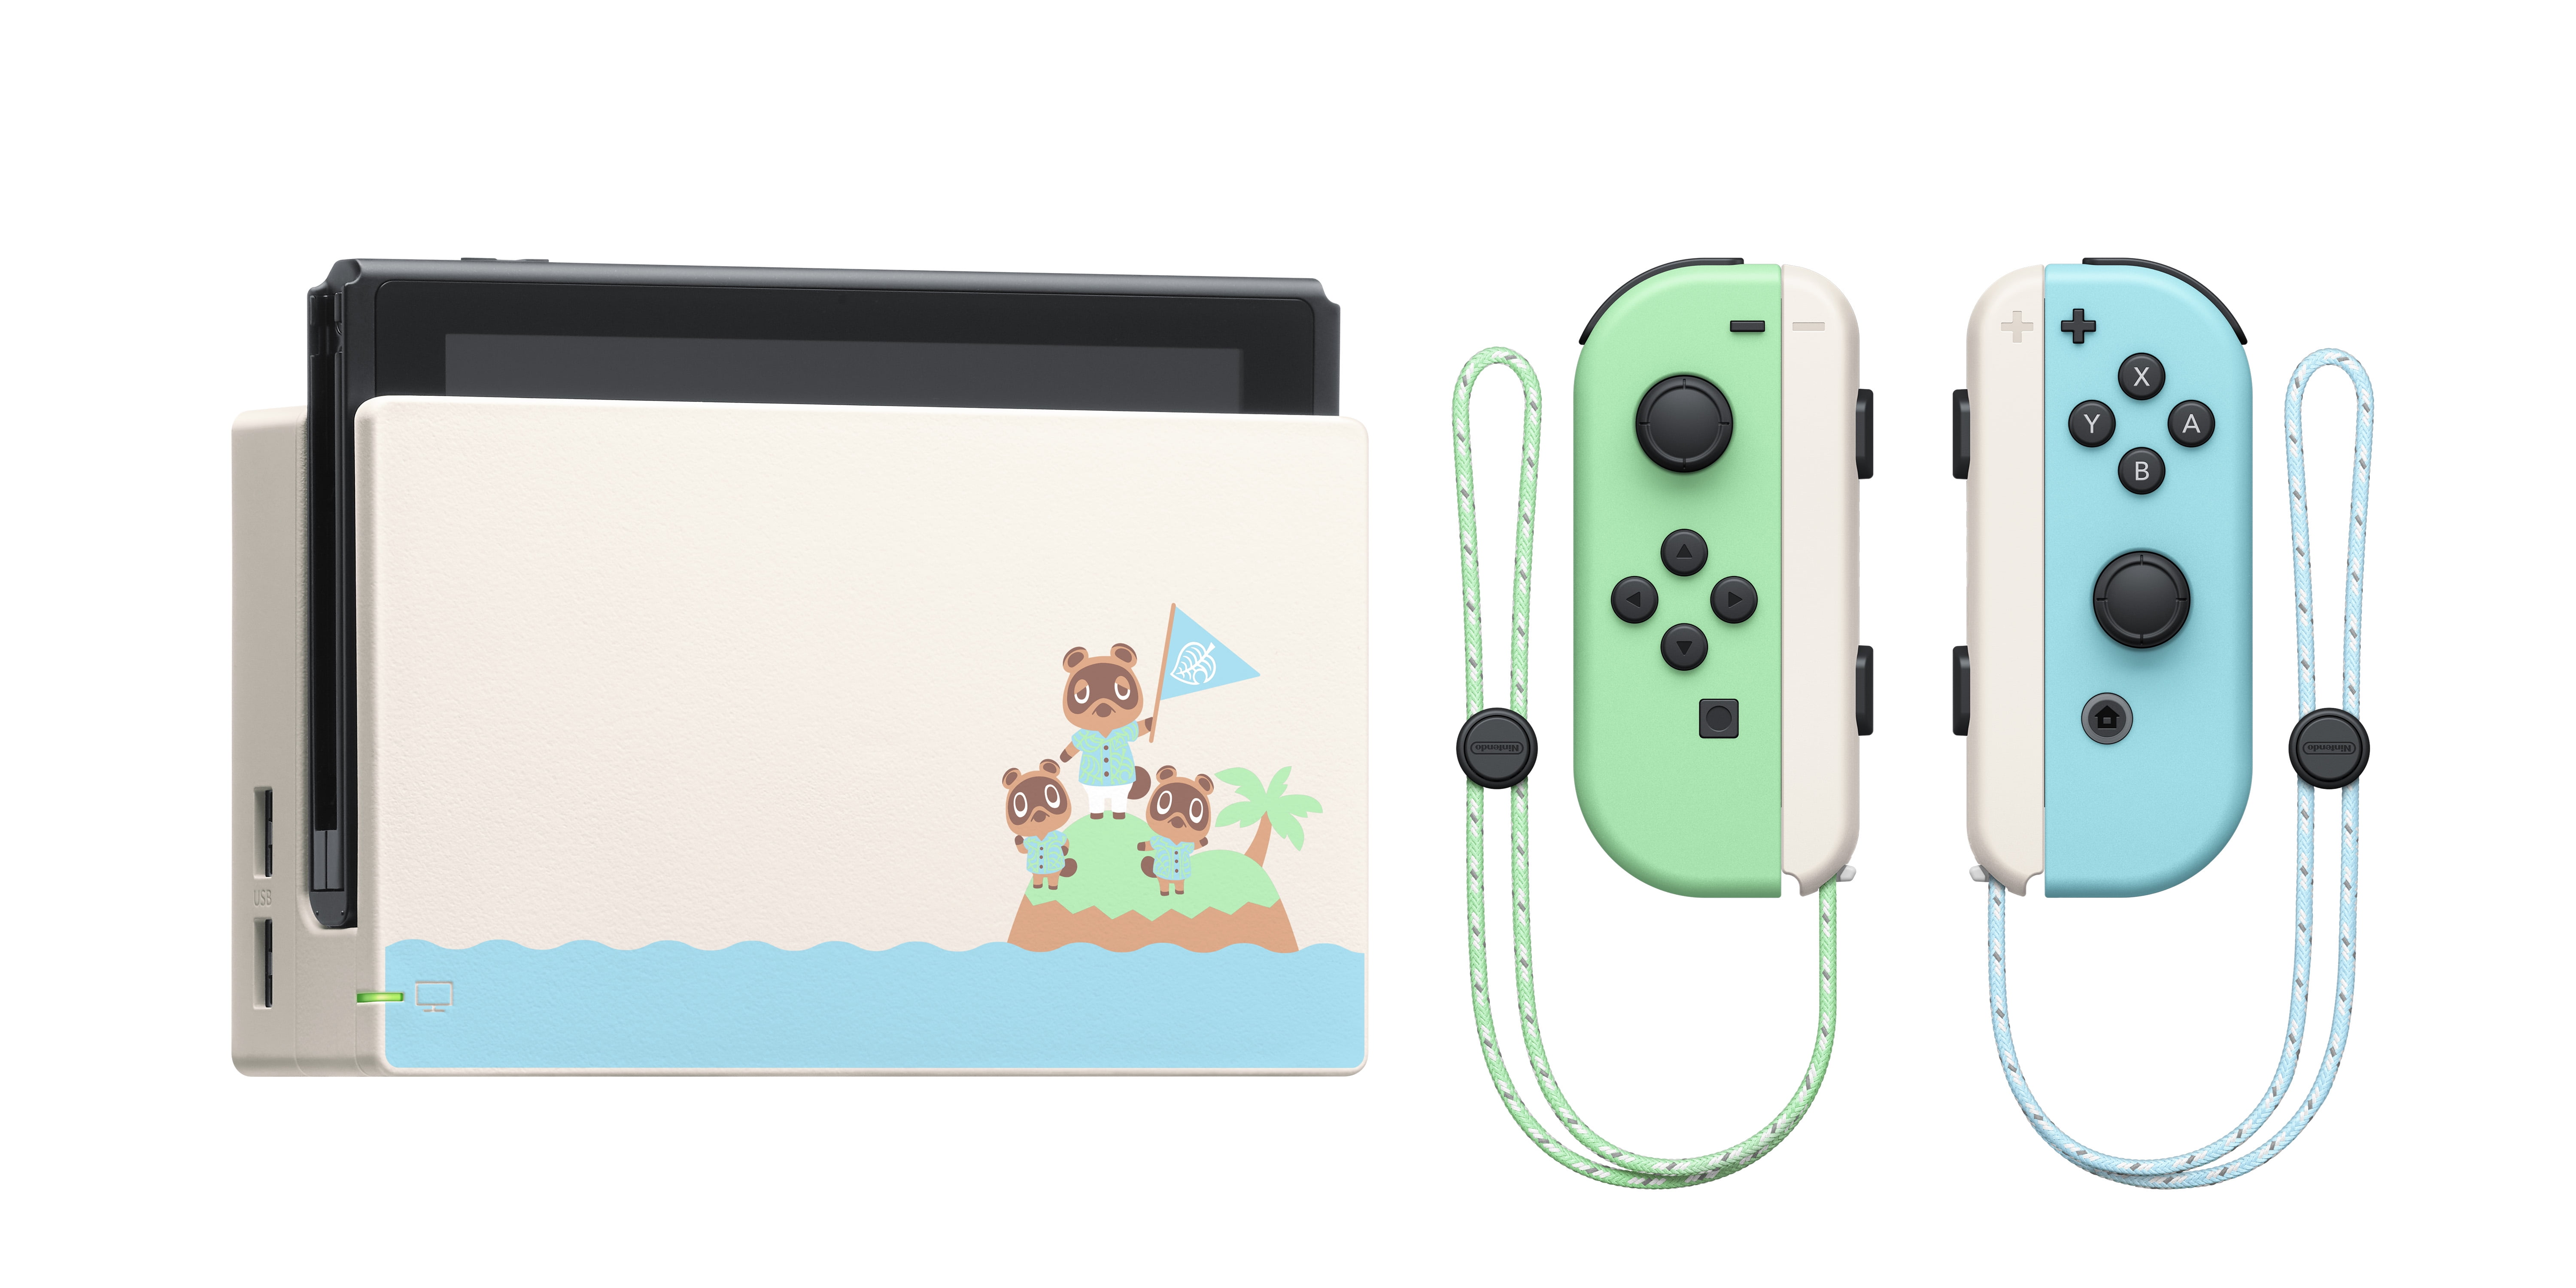 forest of animals nintendo switch